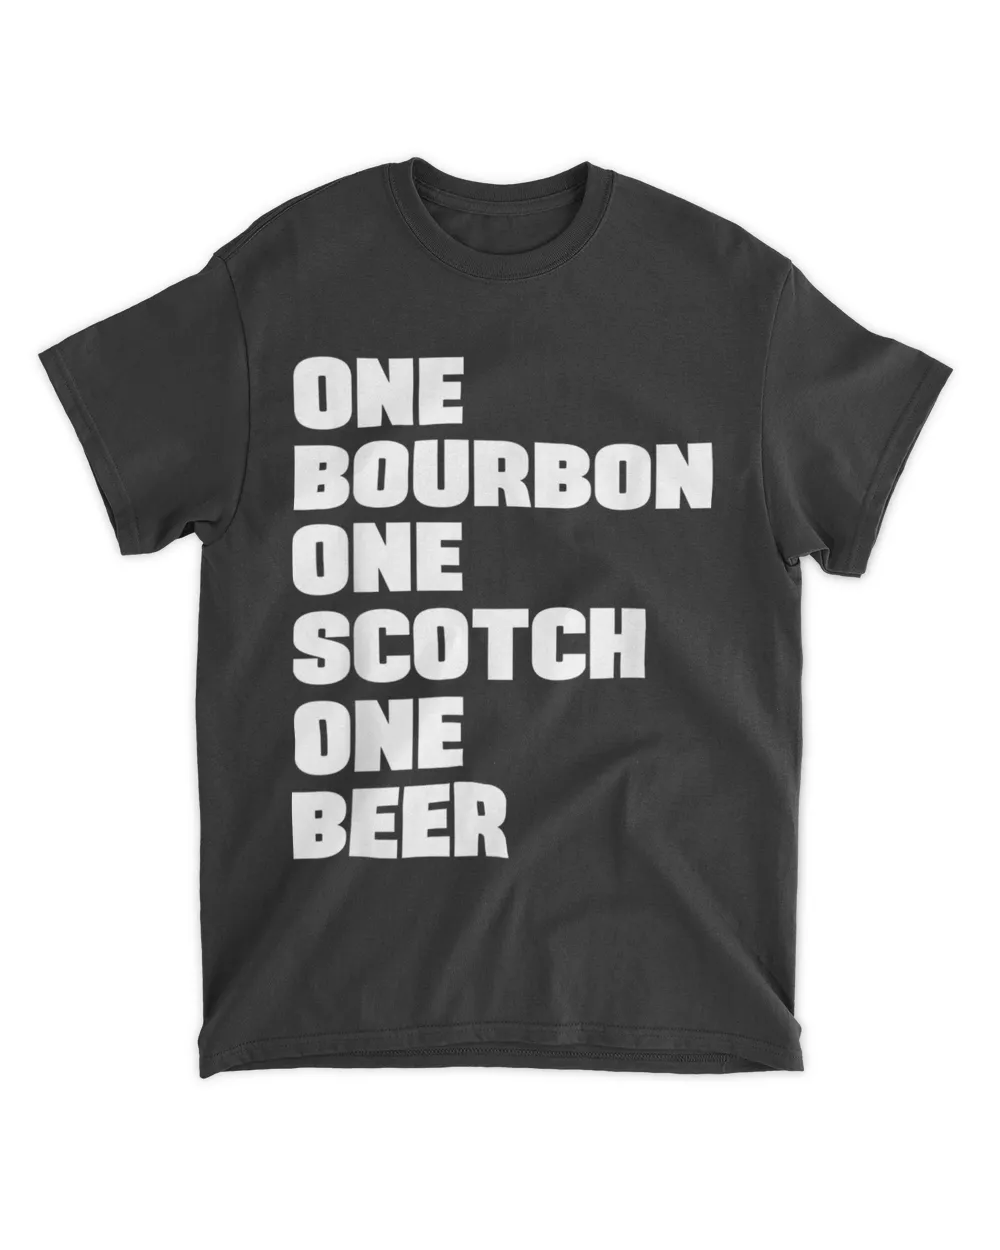 Beer One Bourbon One Scotch One Beer Shirt